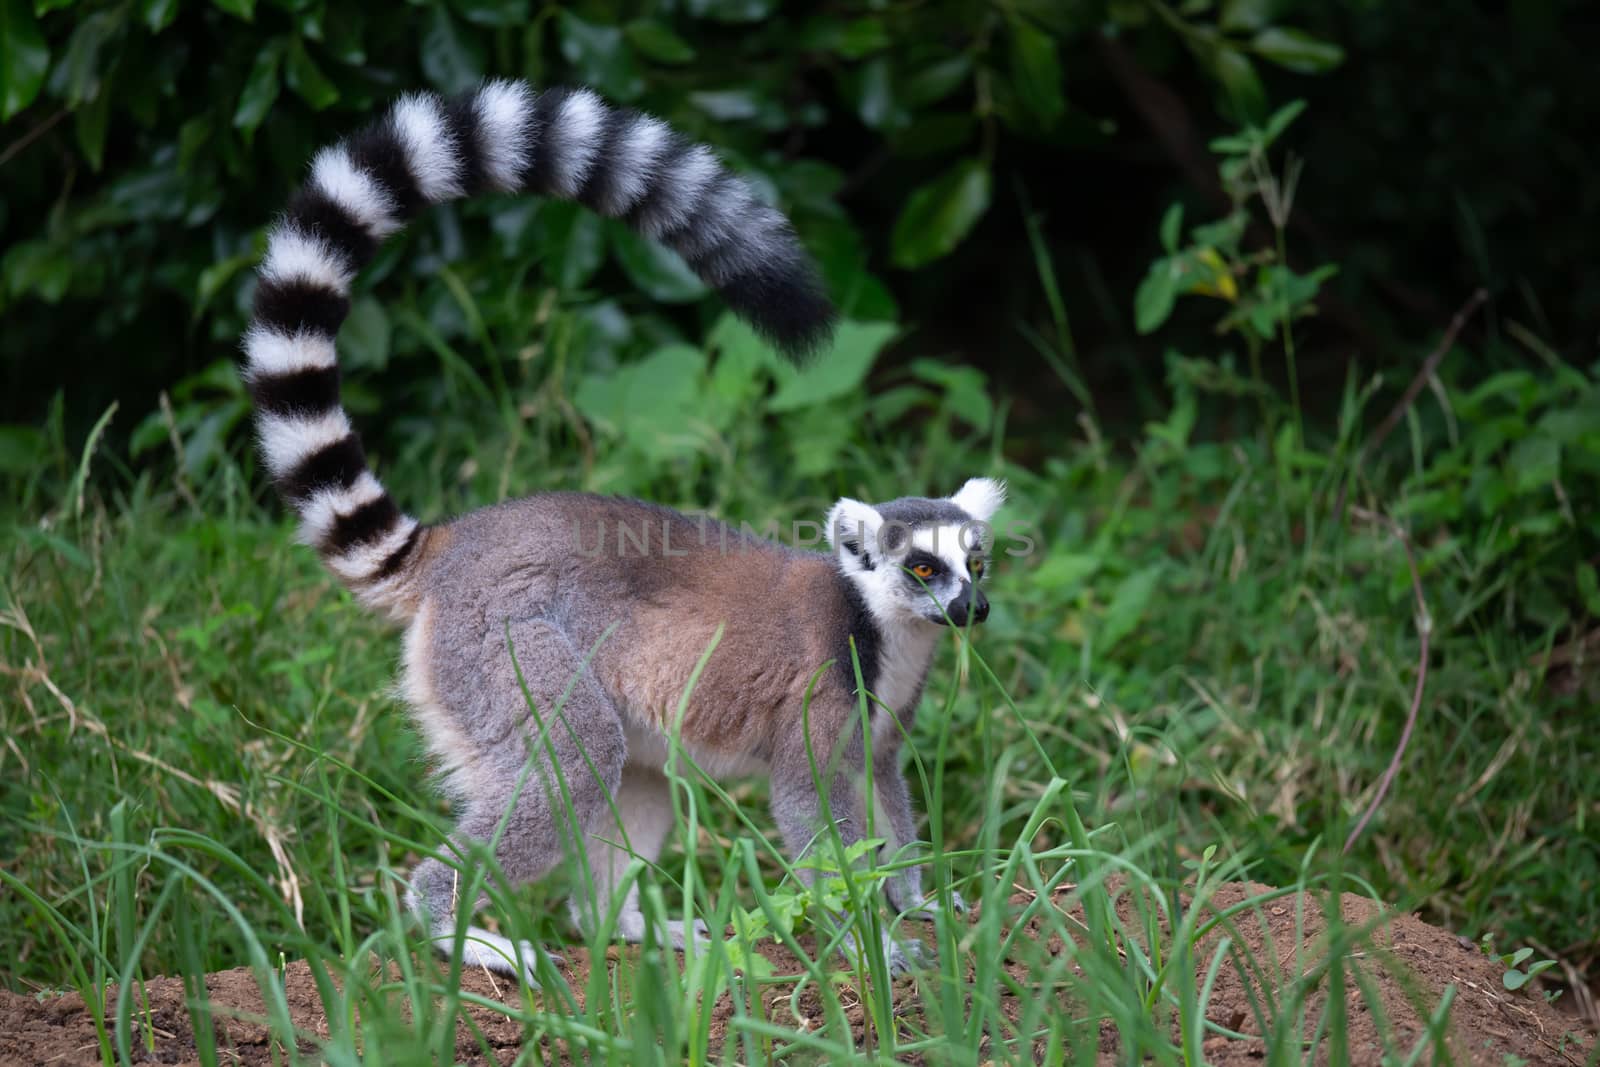 A ring-tailed lemur in its natural environment by 25ehaag6